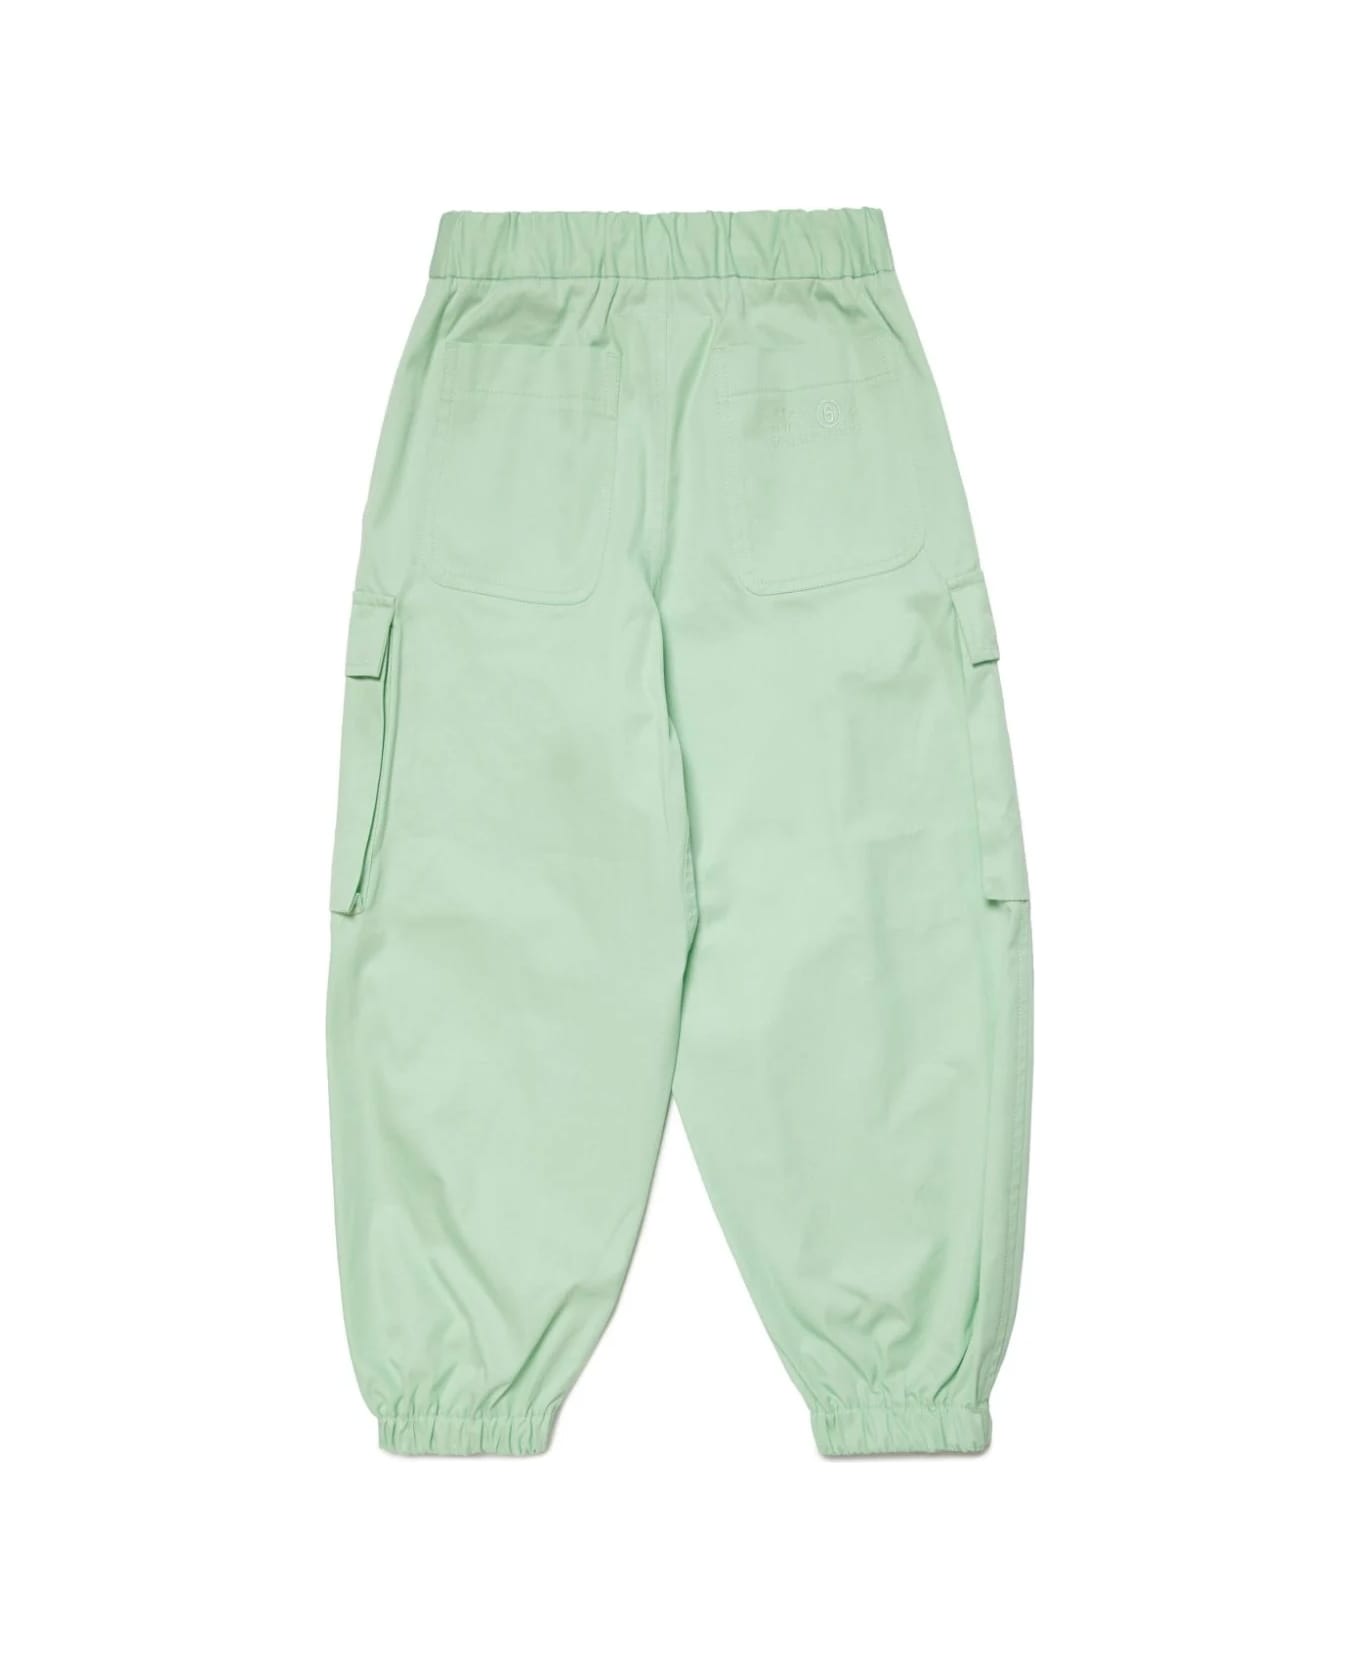 MM6 Maison Margiela Tapered Trousers - Green